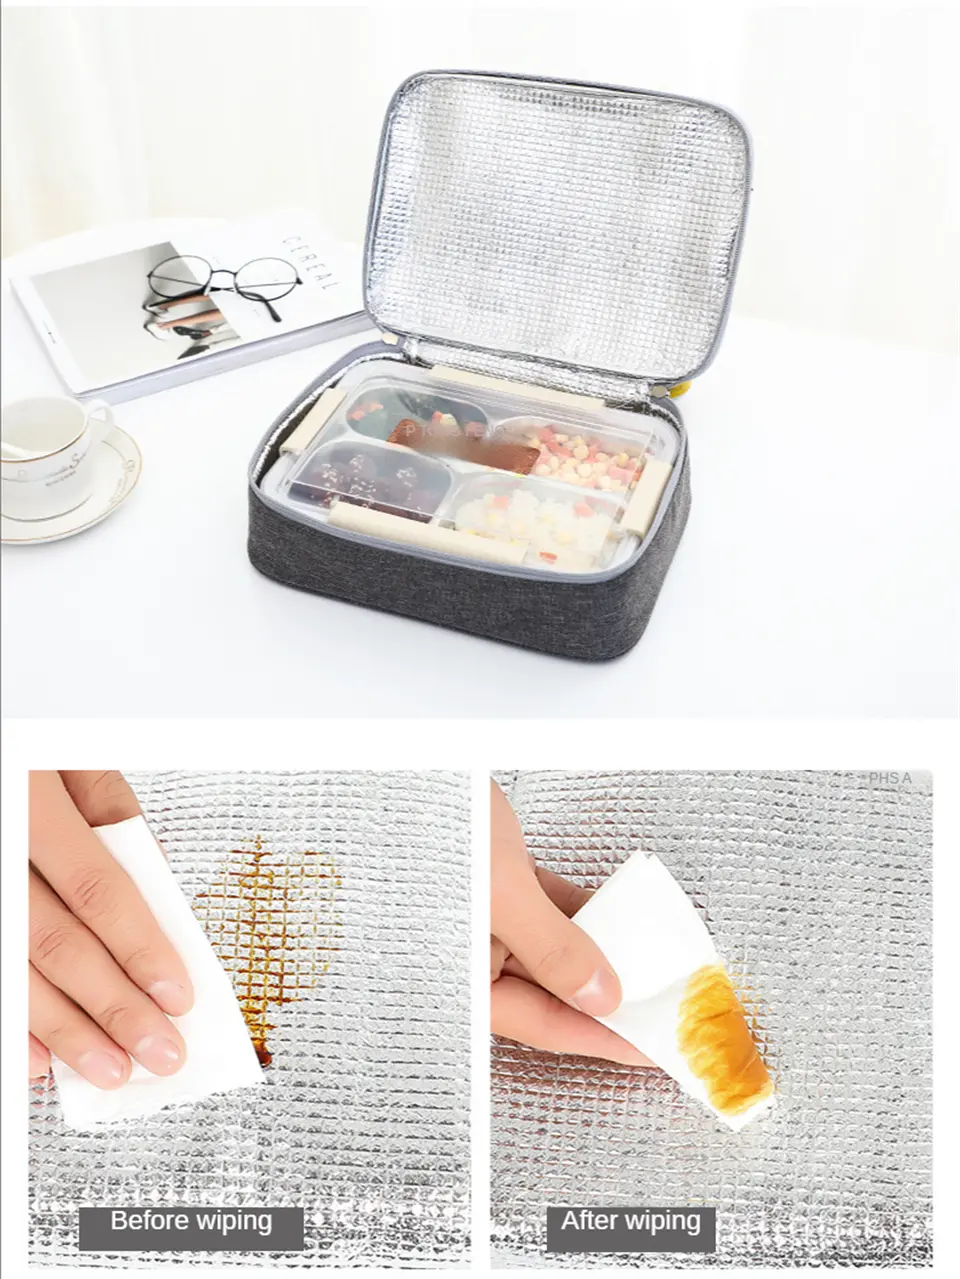 Lunch-Bento-Bag-Portable-Camping-Hiking-Travel-Picnic-Food-Office-Cooler-Pouch-Eating-Keep-Fresh-Storage17